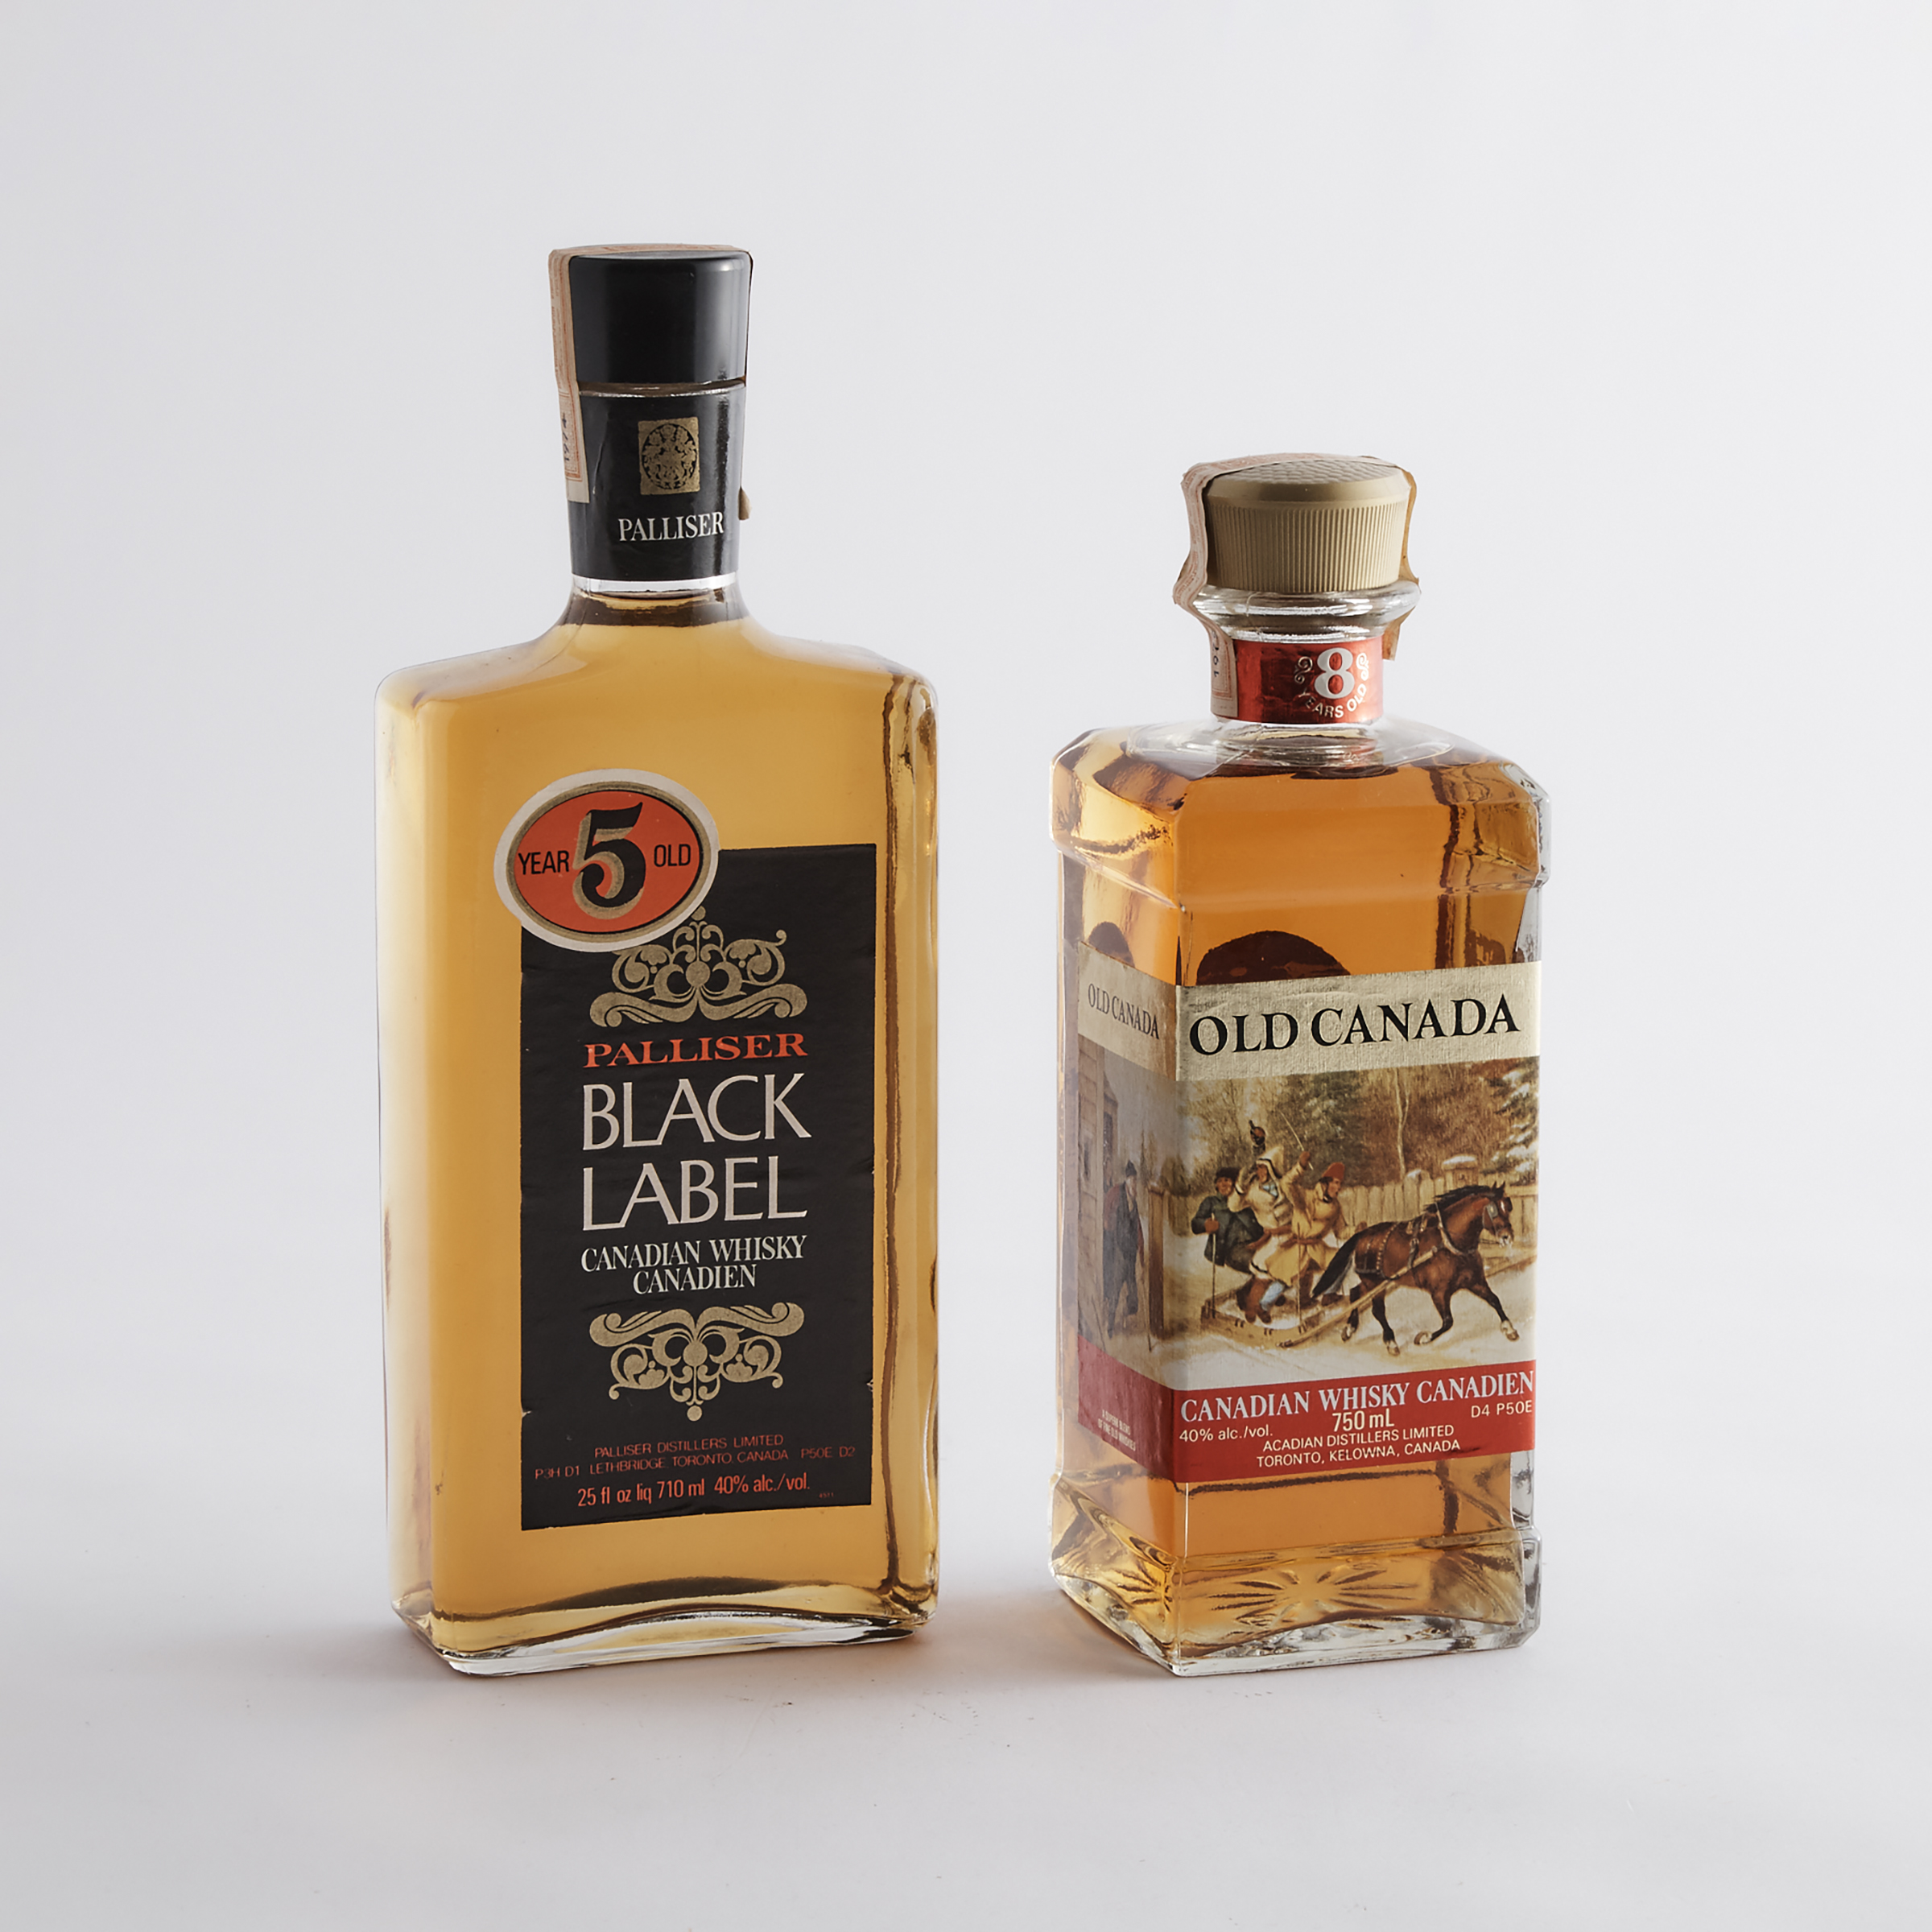 BLACK LABEL BLENDED CANADIAN WHISKY 5 YEARS (ONE 710 ML)
OLD CANADA CANADIAN WHISKY 8 YEARS (ONE 750 ML)